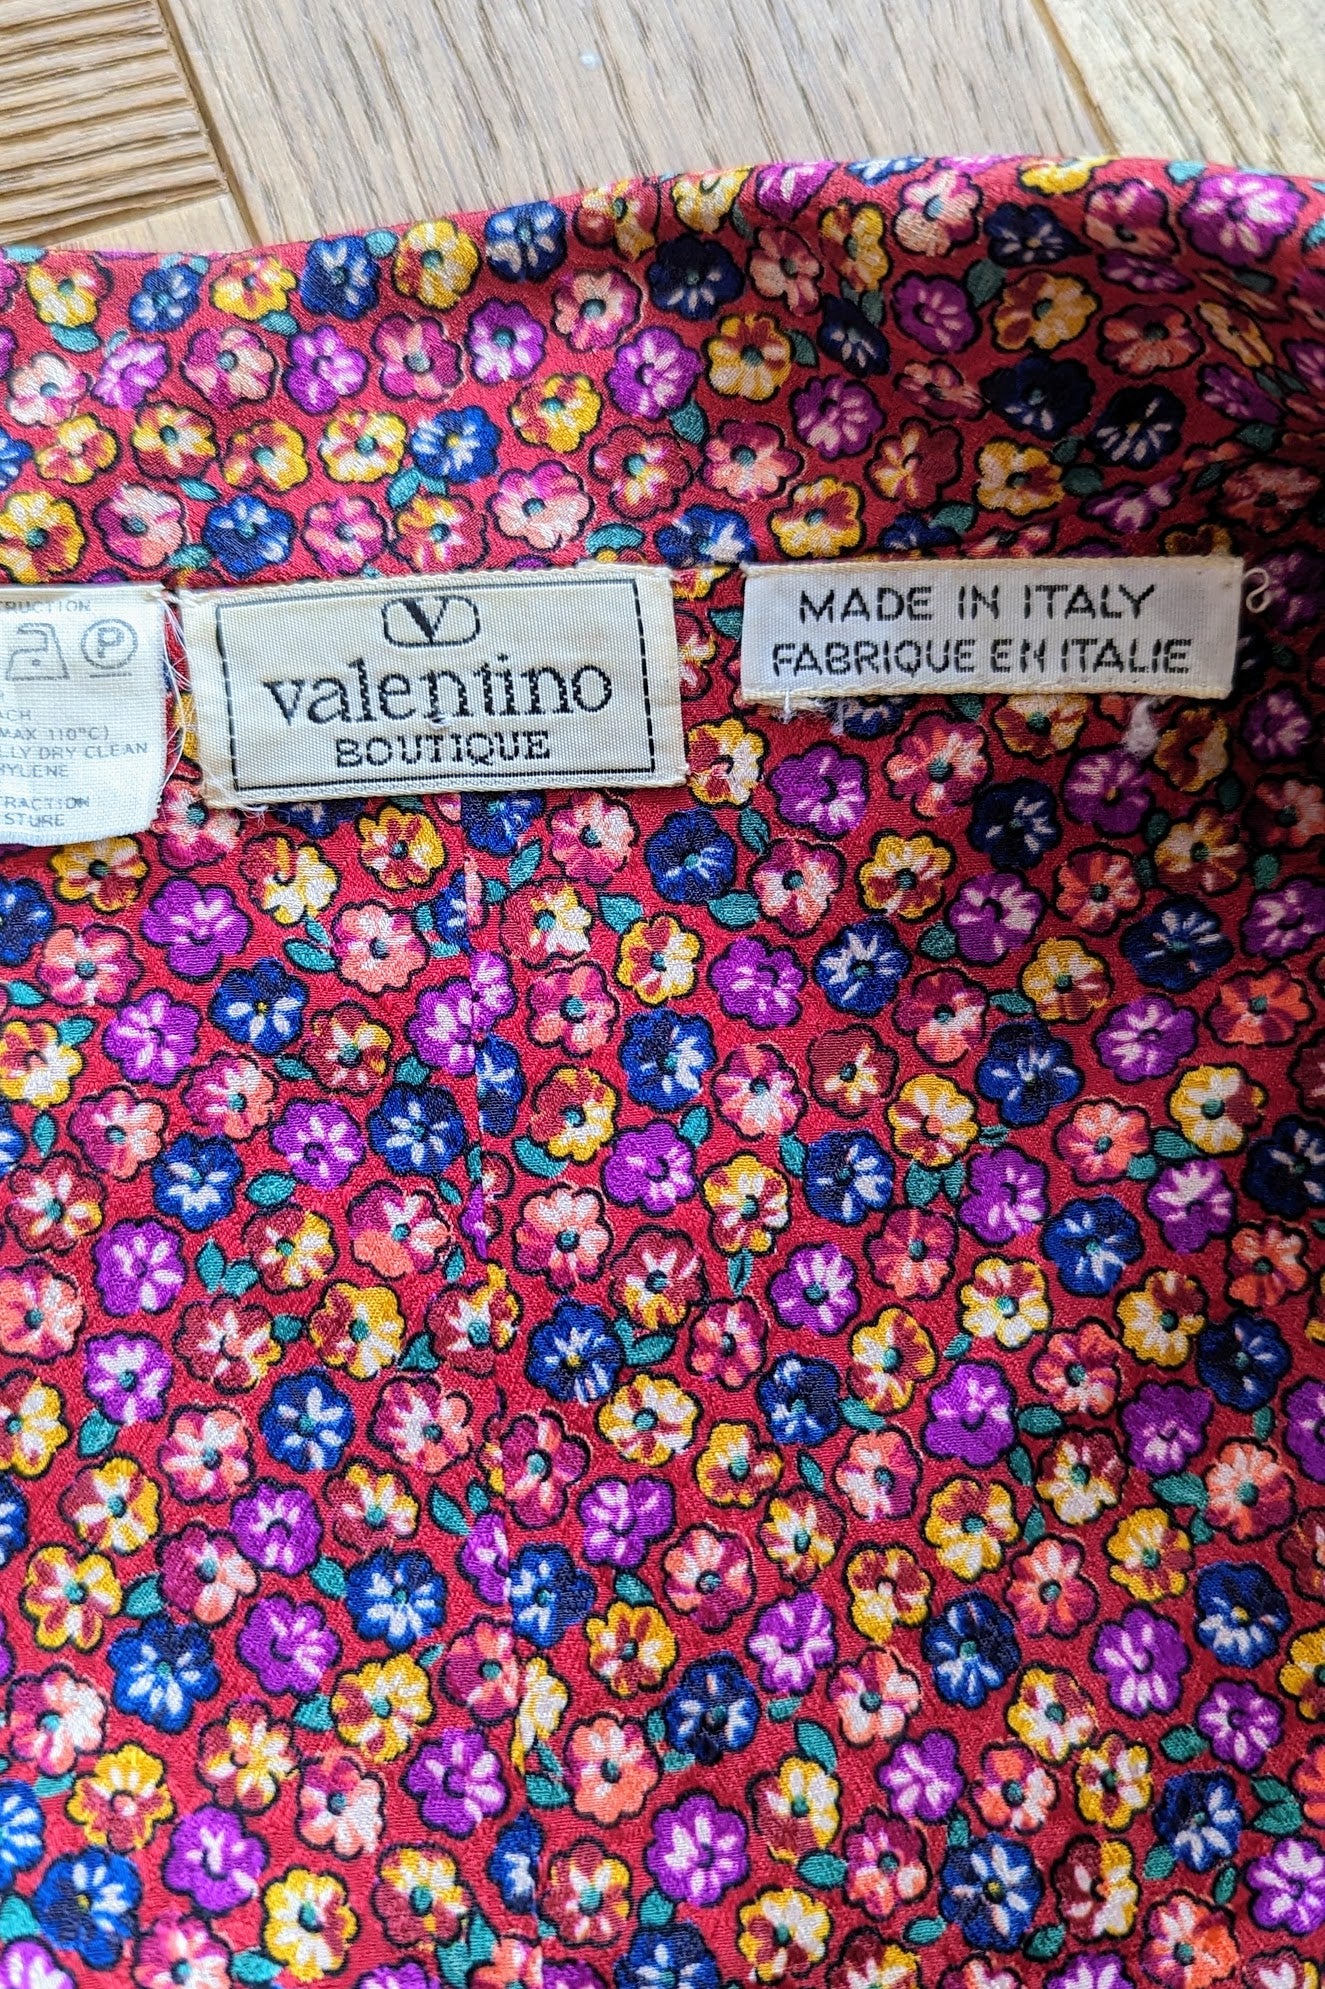 vintage valentino label, made in italy